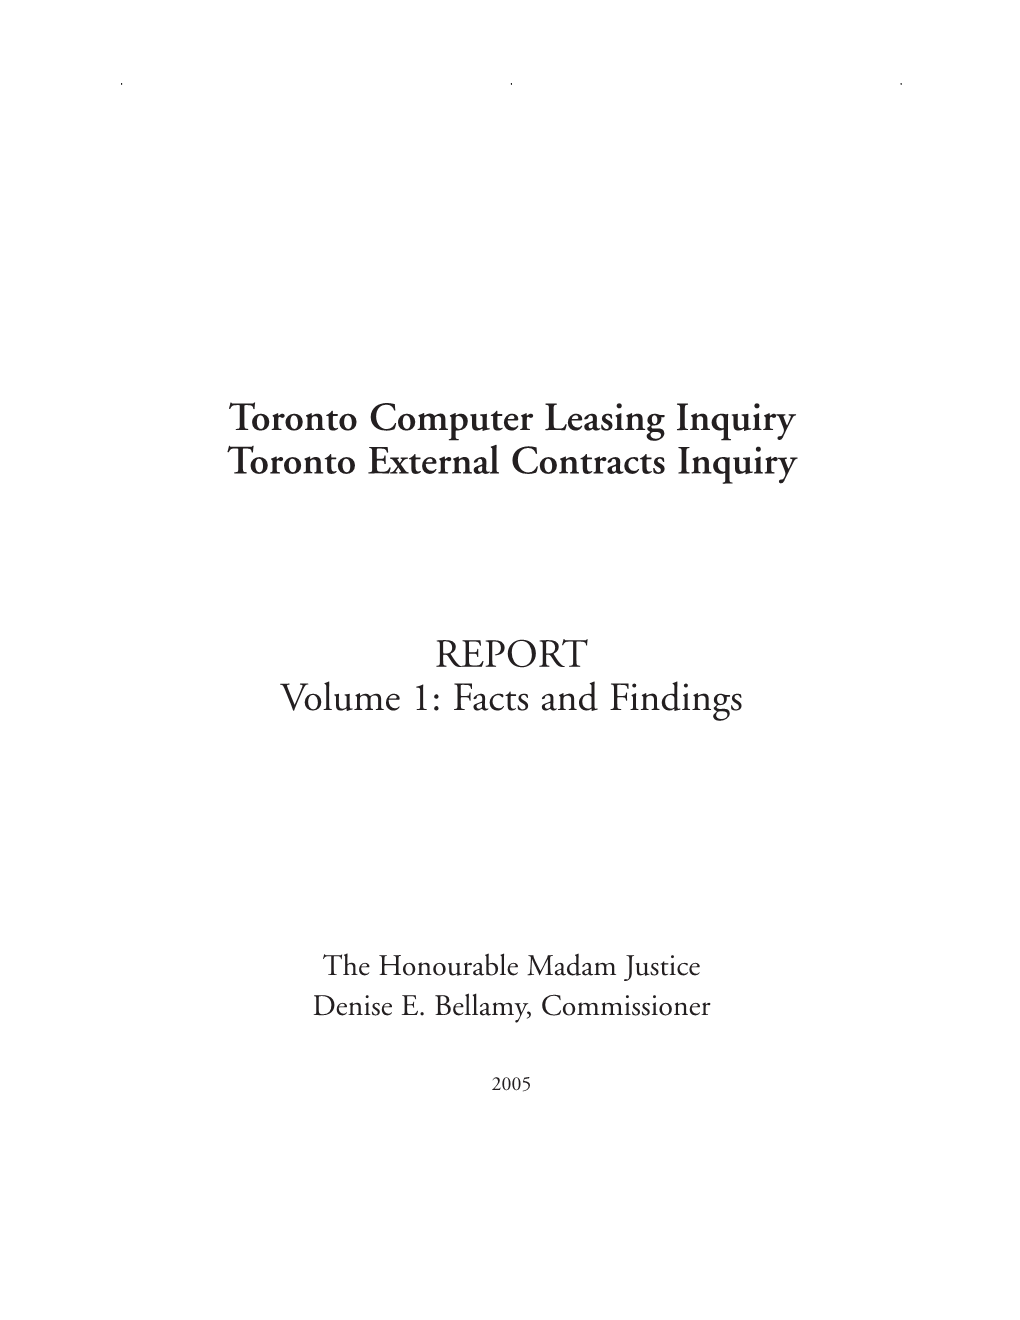 Toronto Computer Leasing Inquiry Toronto External Contracts Inquiry